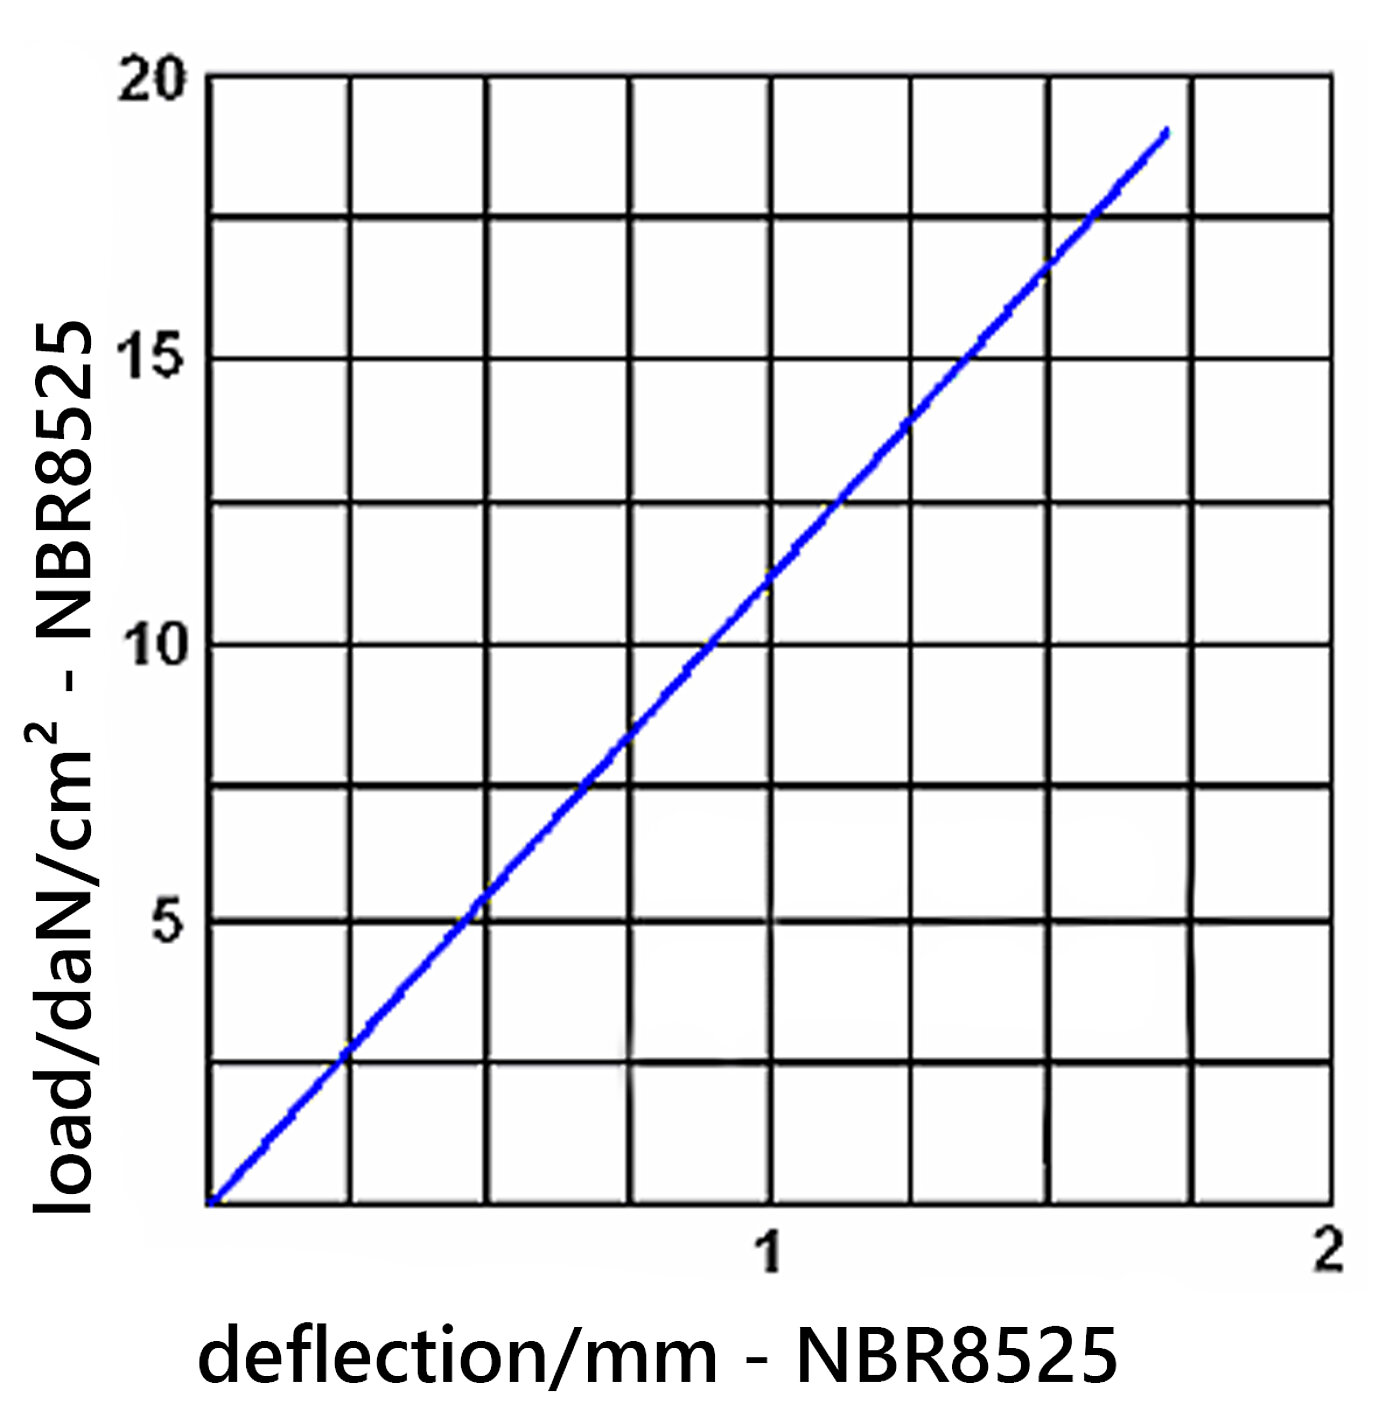 diagramme of the deflection of the elastomer board NBR8525 under load 